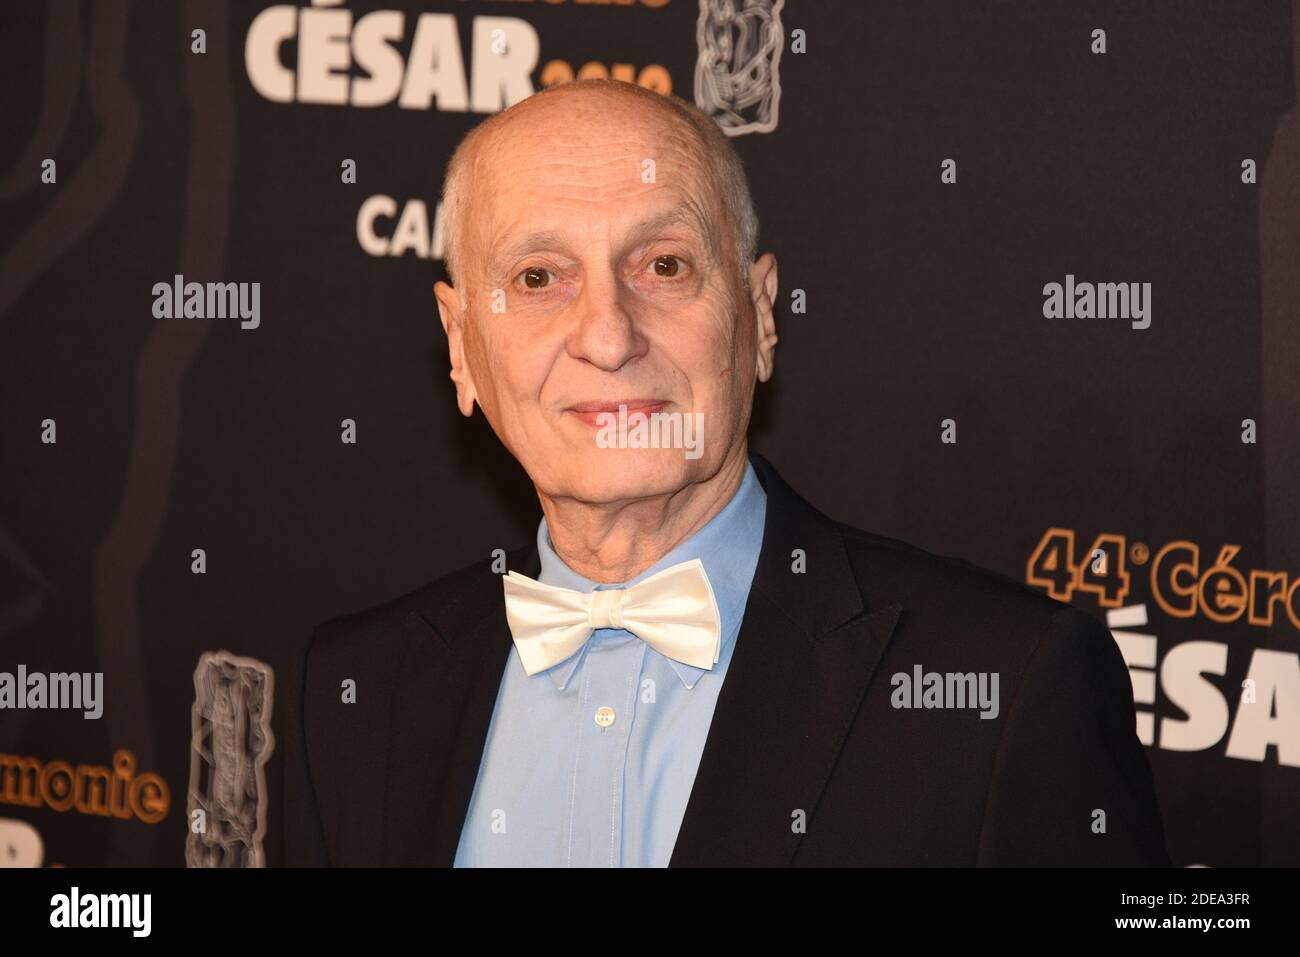 Michel Ocelot arriving to the 44th Annual Cesar Film Awards ceremony held at the Salle Pleyel, in Paris, France on February 22, 2019. Photo by Mireille Ampilhac/ABACAPRESS.COM Stock Photo